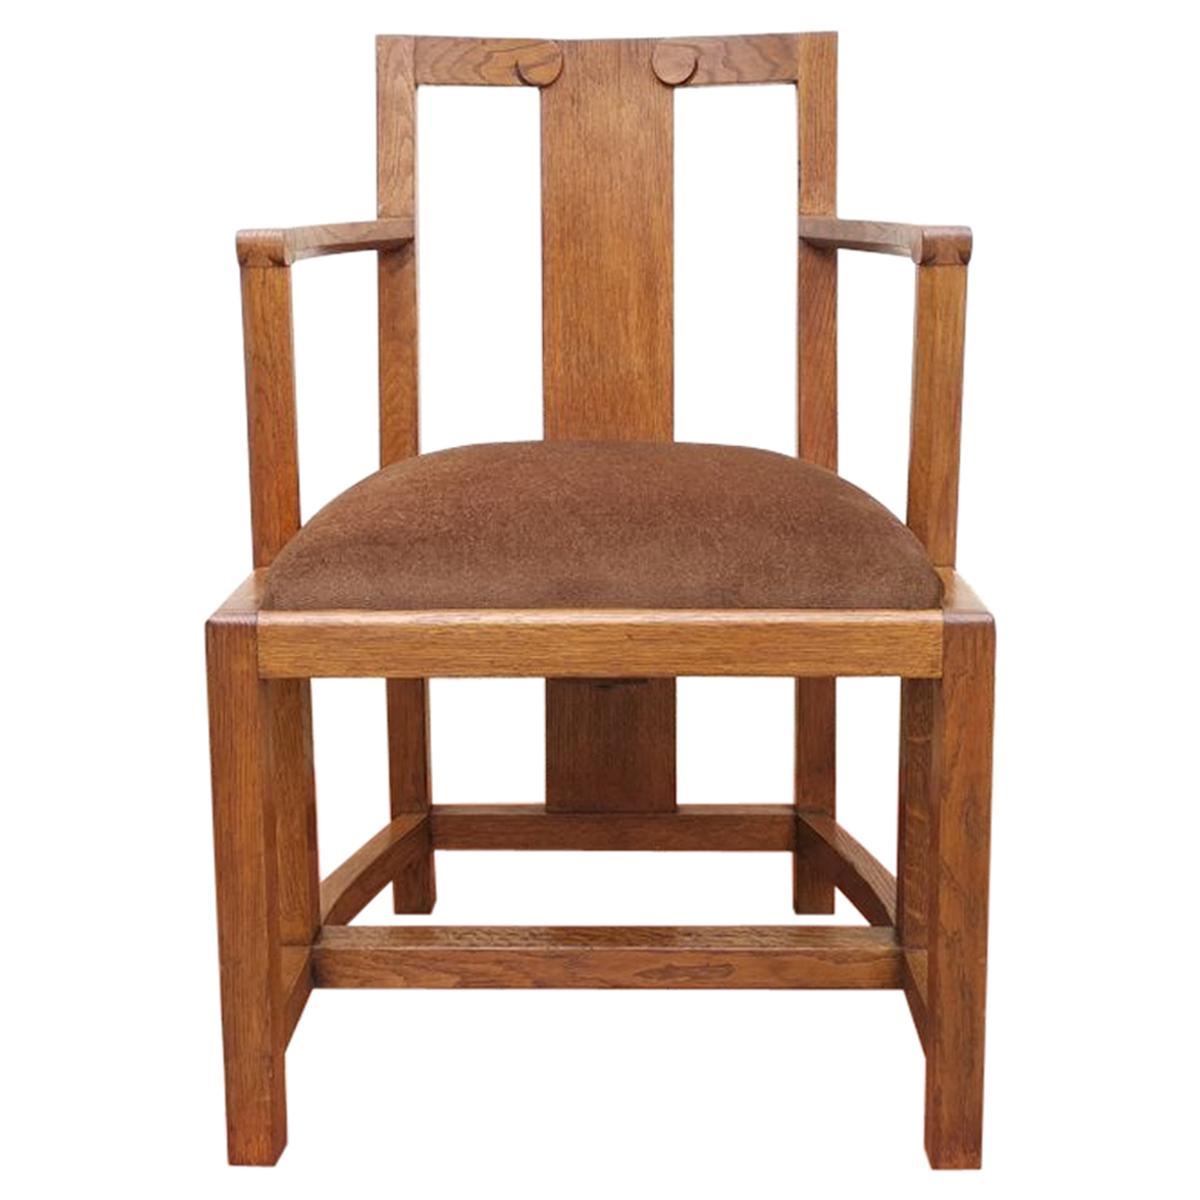 Frank Brangwyn, Armchair for the Canadian Pacific Liner 'SS Empress of Britain' For Sale